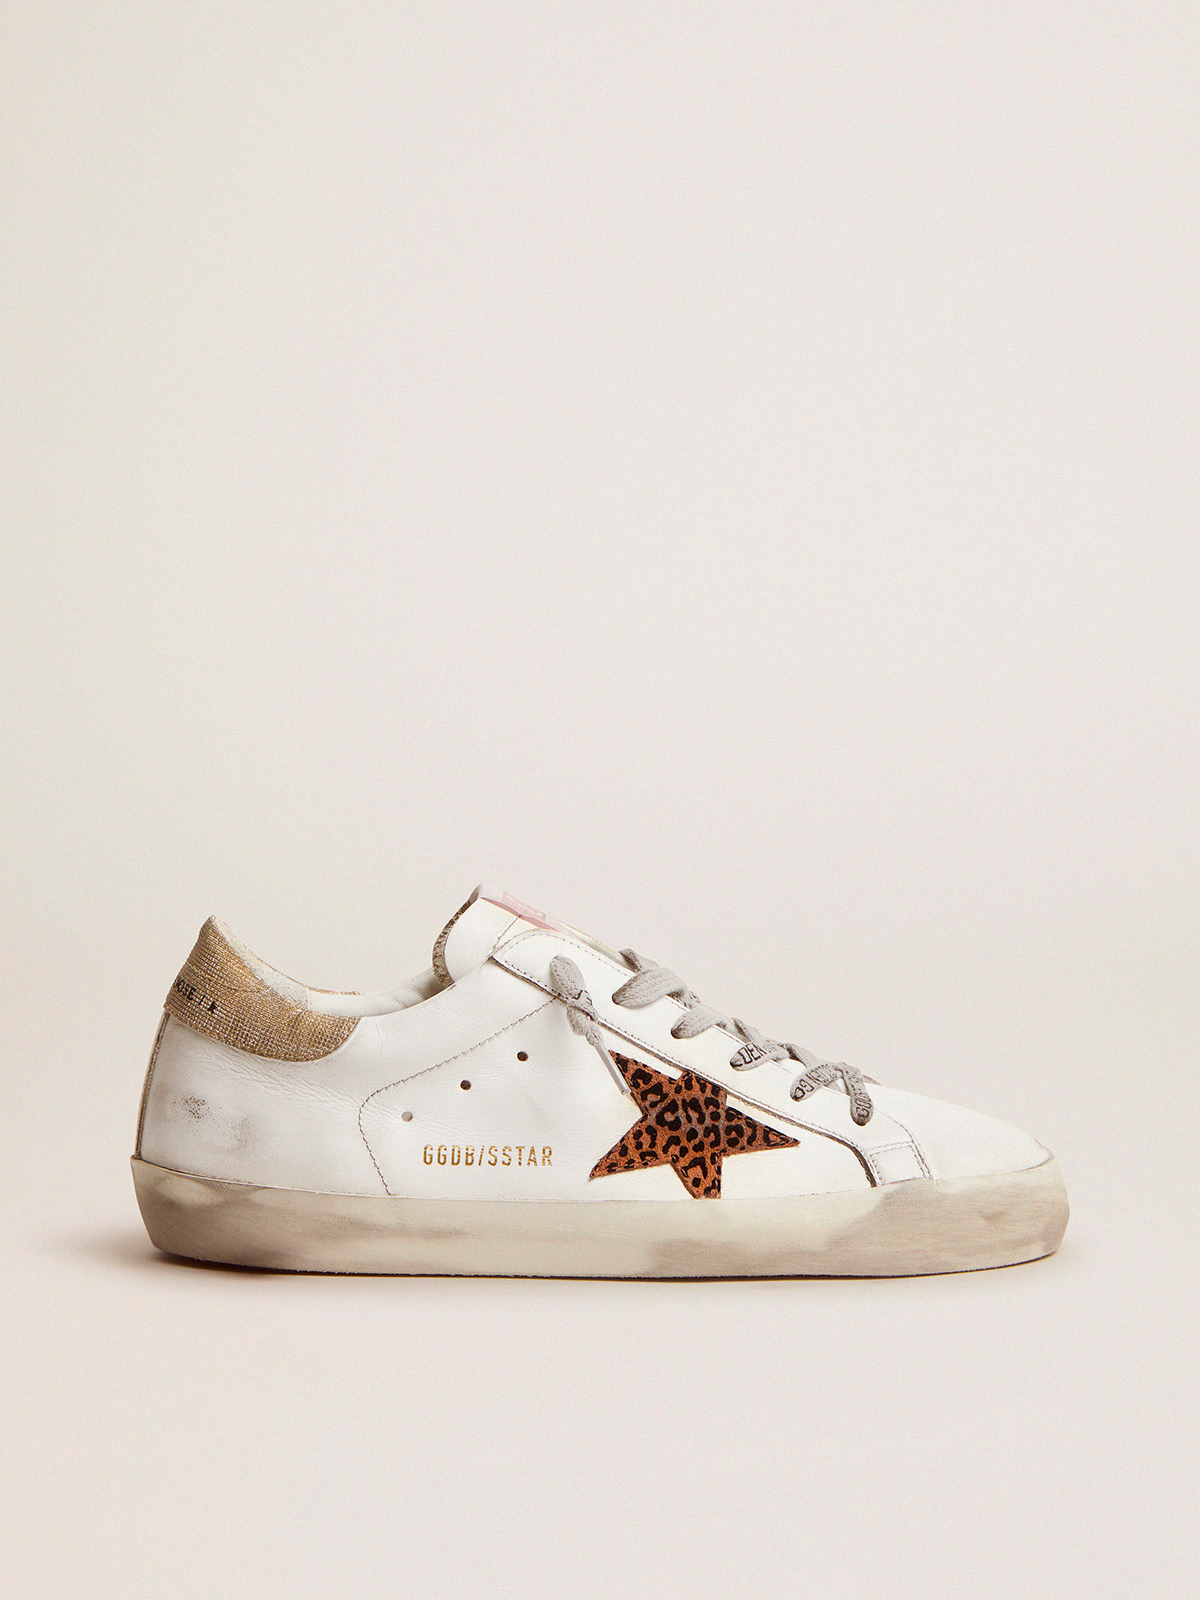 Super-Star LTD sneakers with leopard-print star and gold glitter